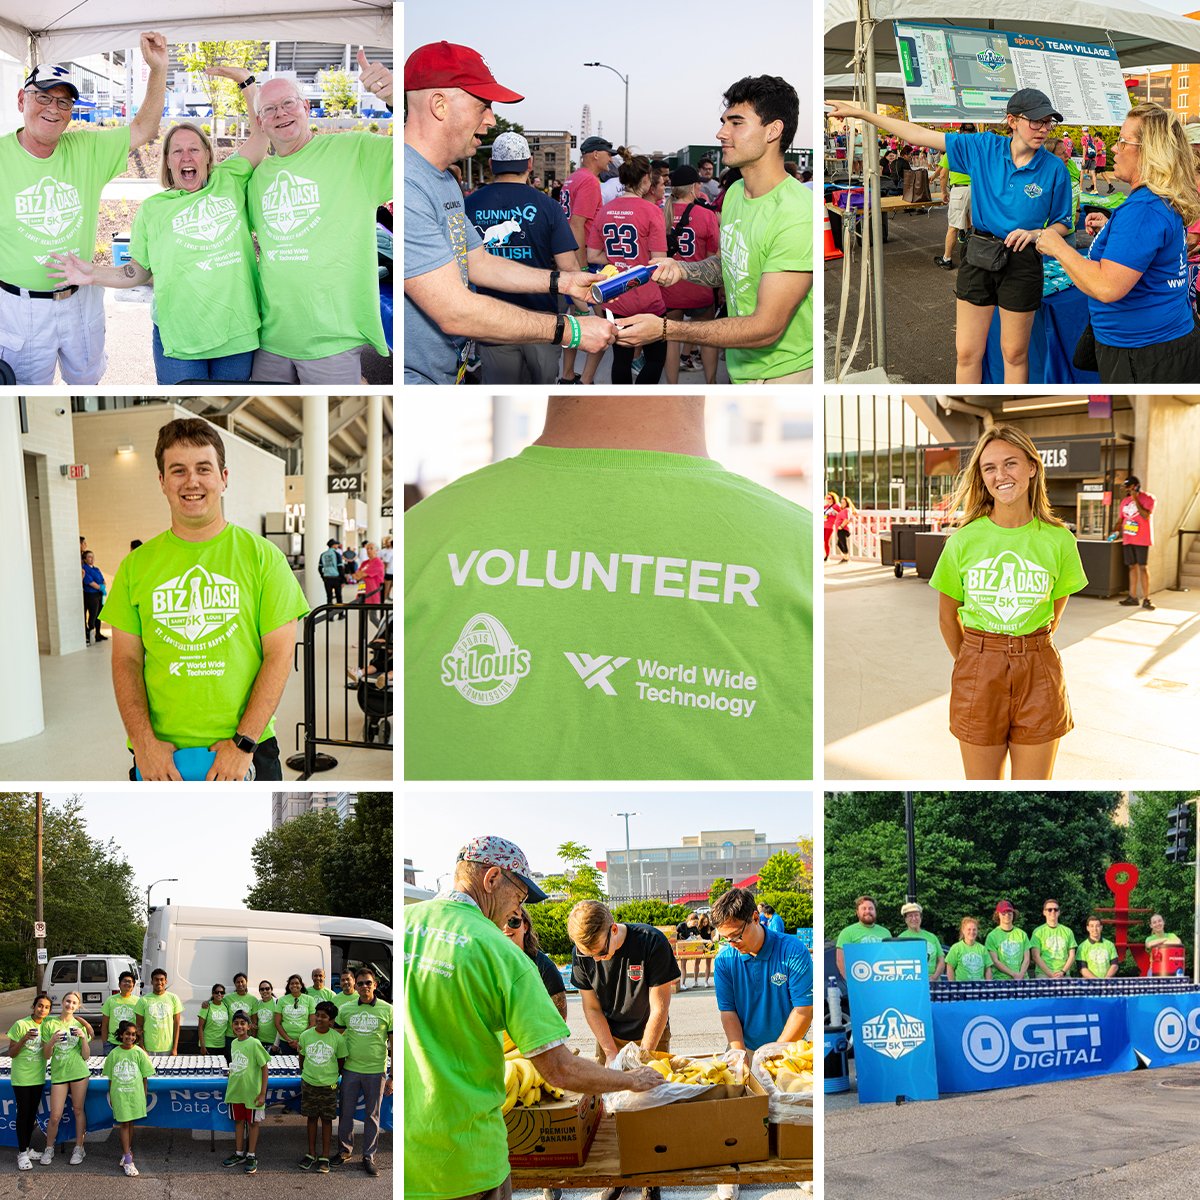 We have plenty of opportunities to help out at this year’s event as a volunteer! It’s a great way to see what the Biz Dash is all about, get service hours, or participate if your company doesn’t have a team. Learn more and sign up today at stlbizdash.com/volunteer.